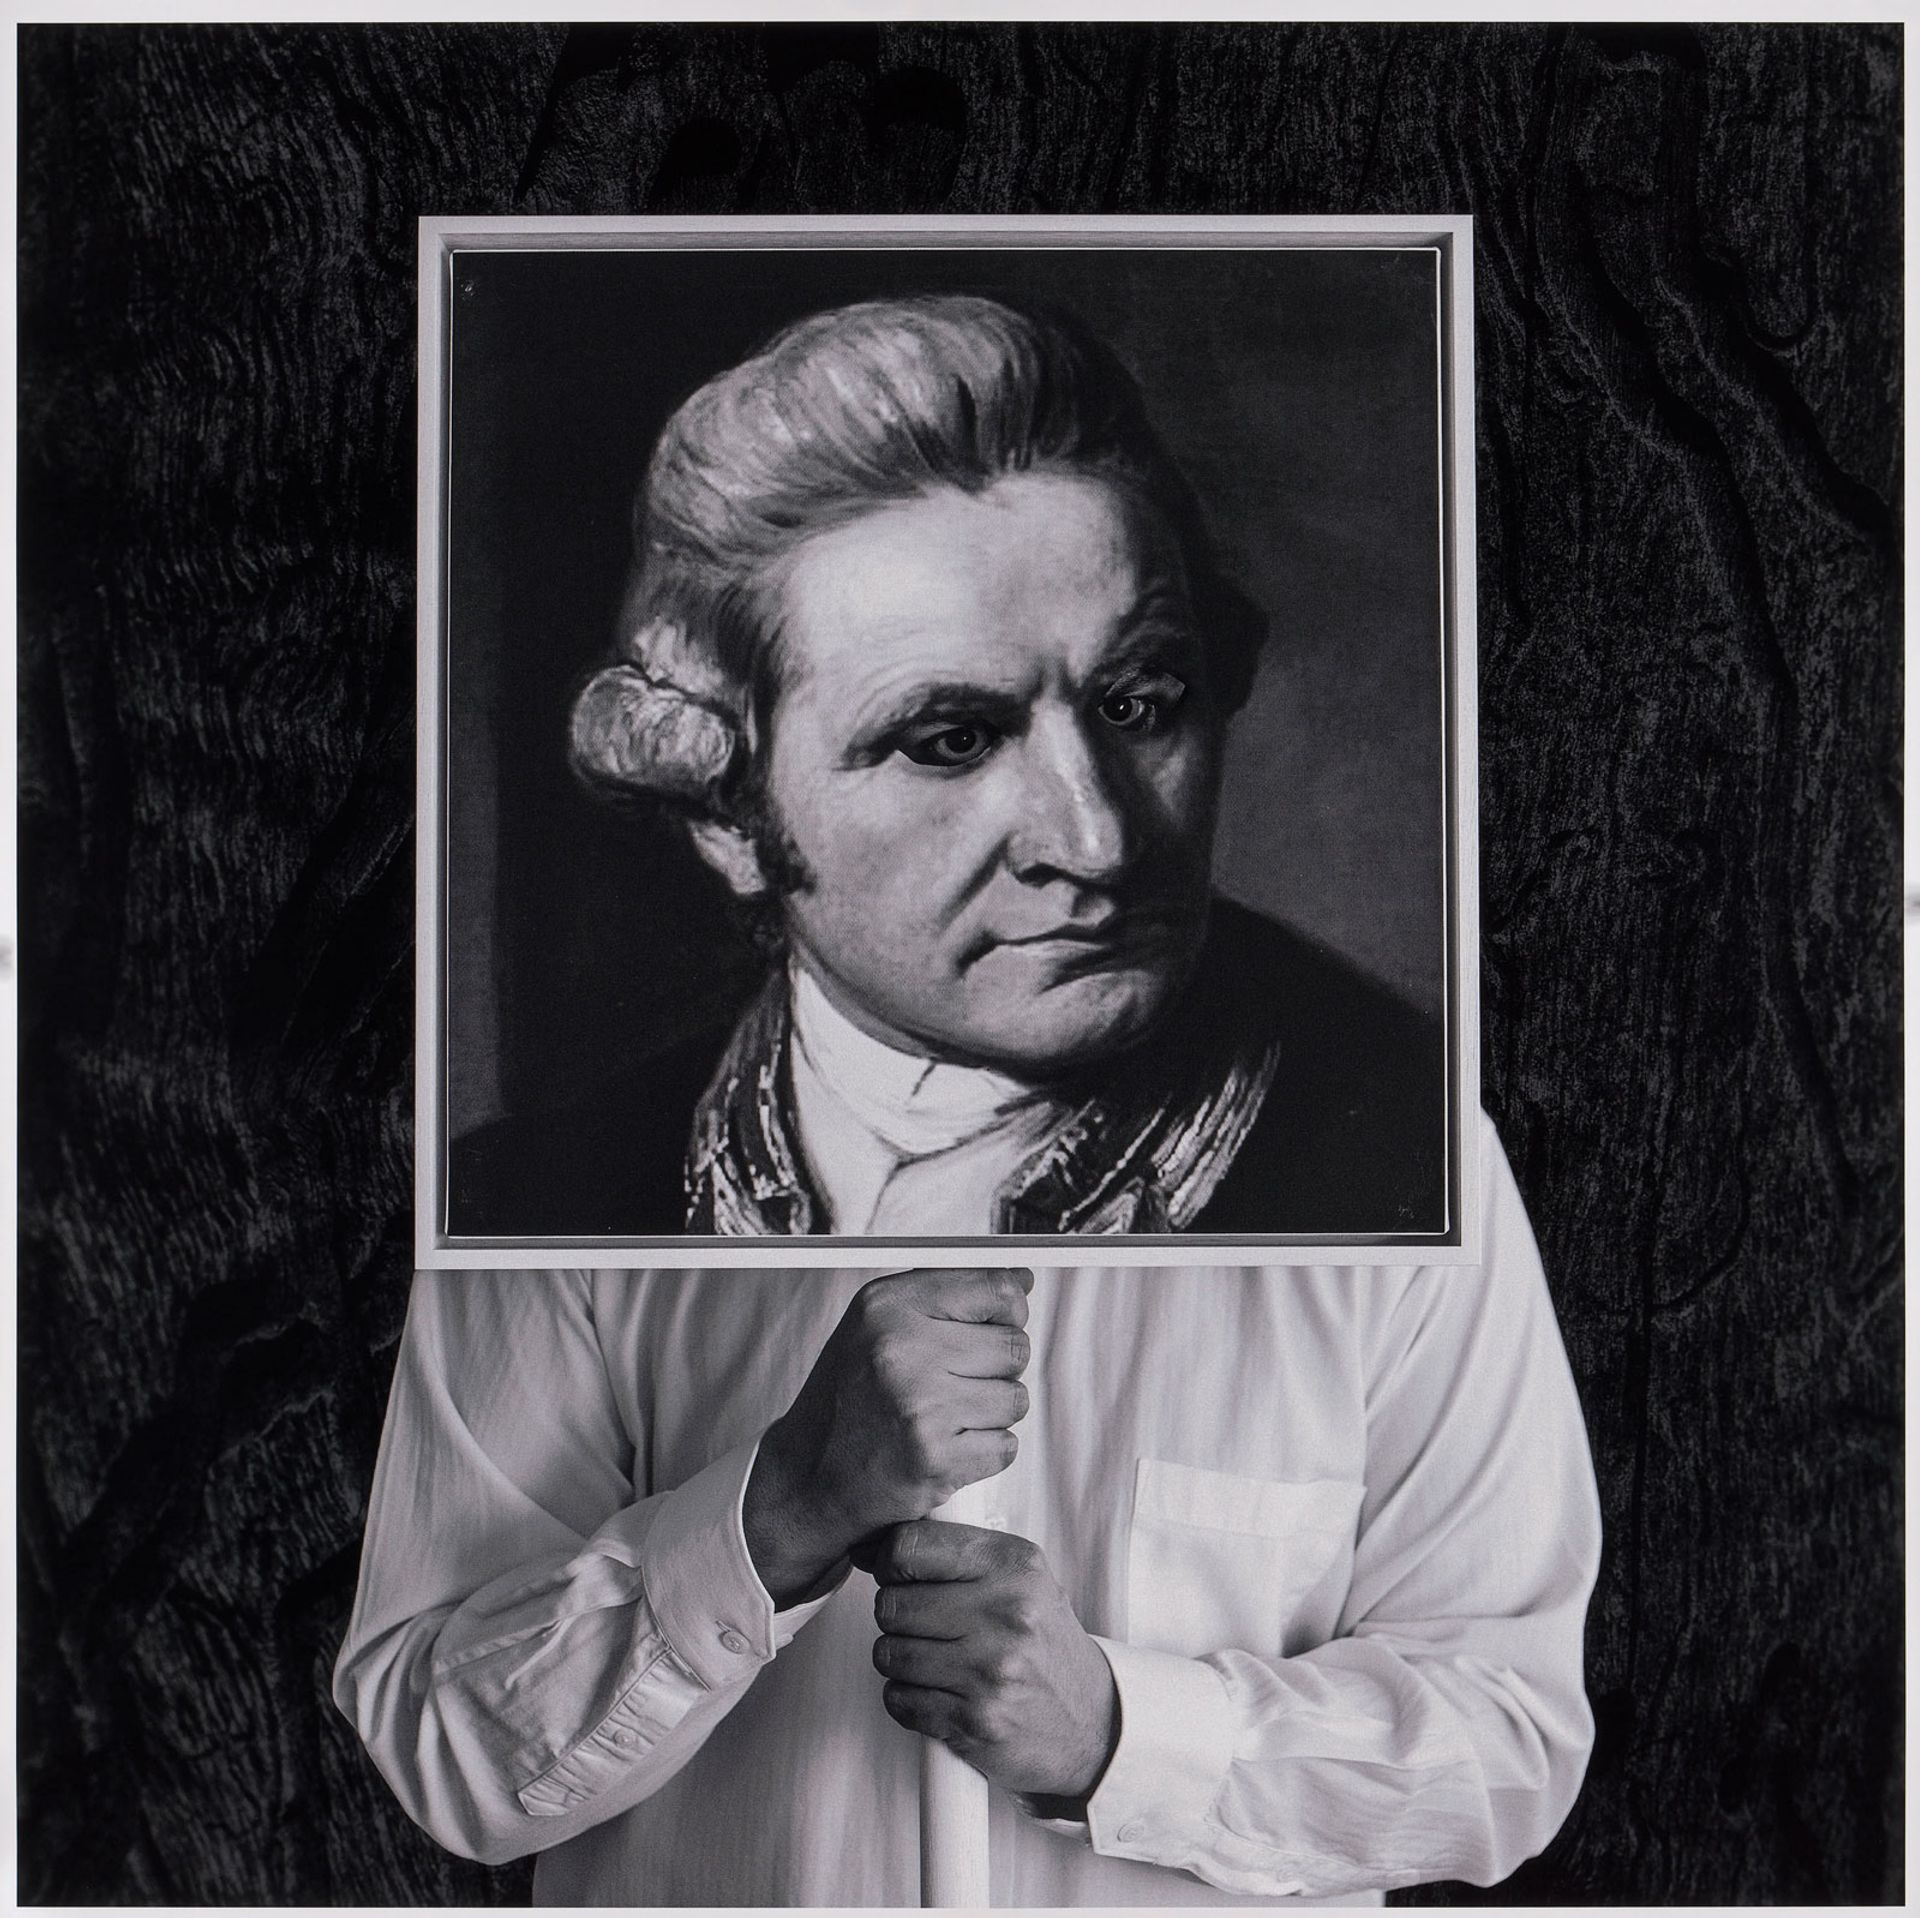 Christian Thompson’s Othering the Explorer, James Cook Courtesy of the artist and Gallery Gabrielle Pizzi